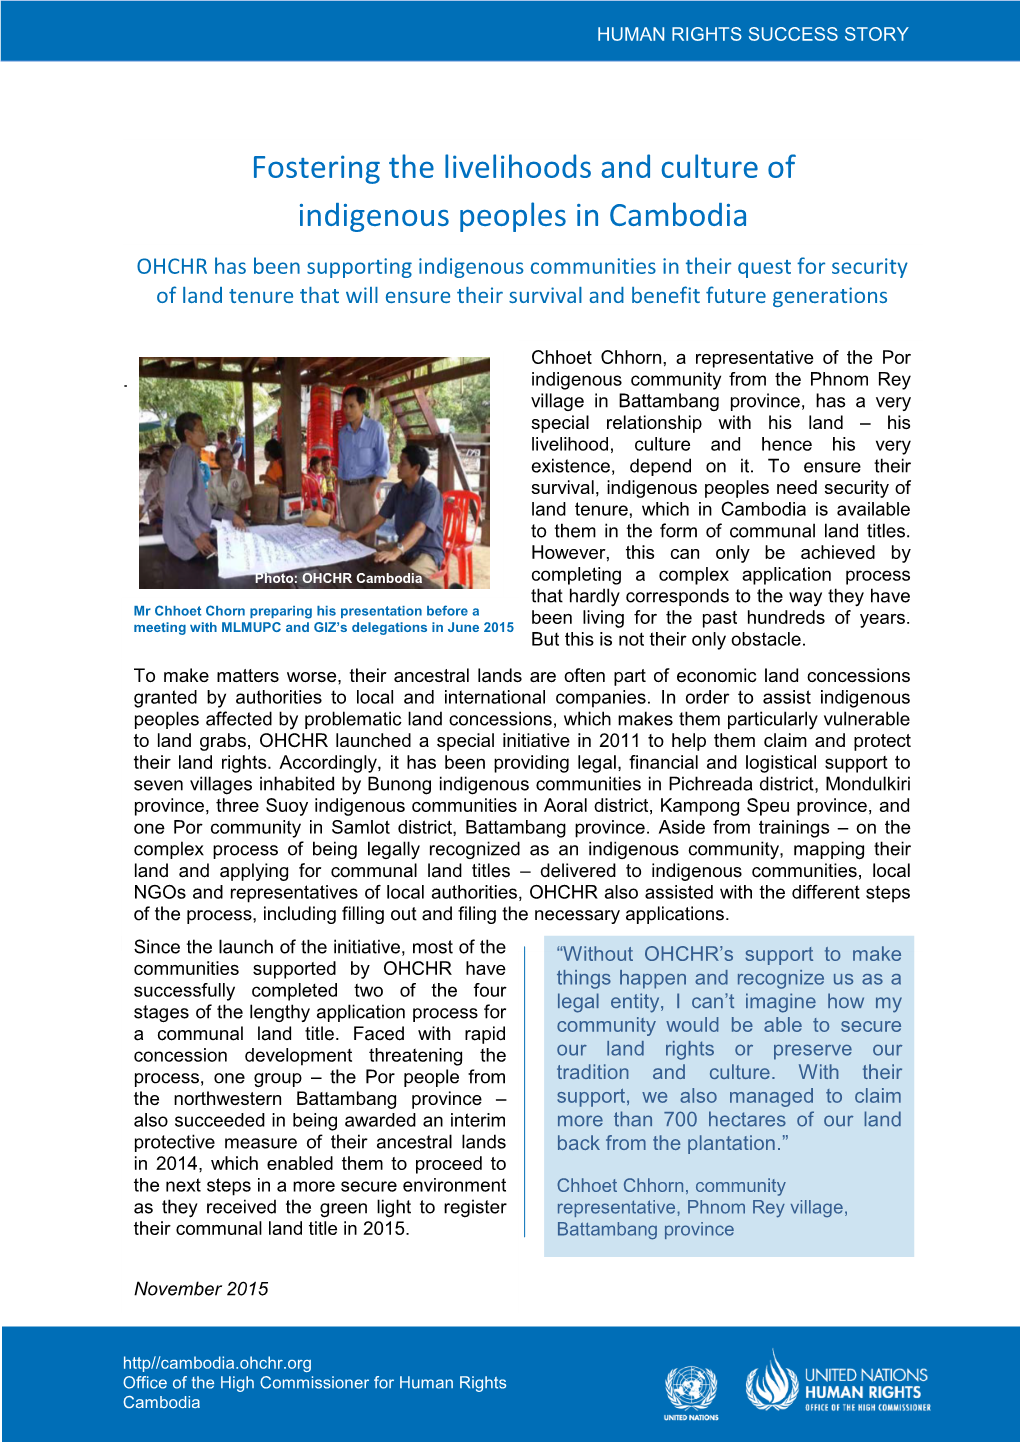 Fostering the Livelihoods and Culture of Indigenous Peoples in Cambodia